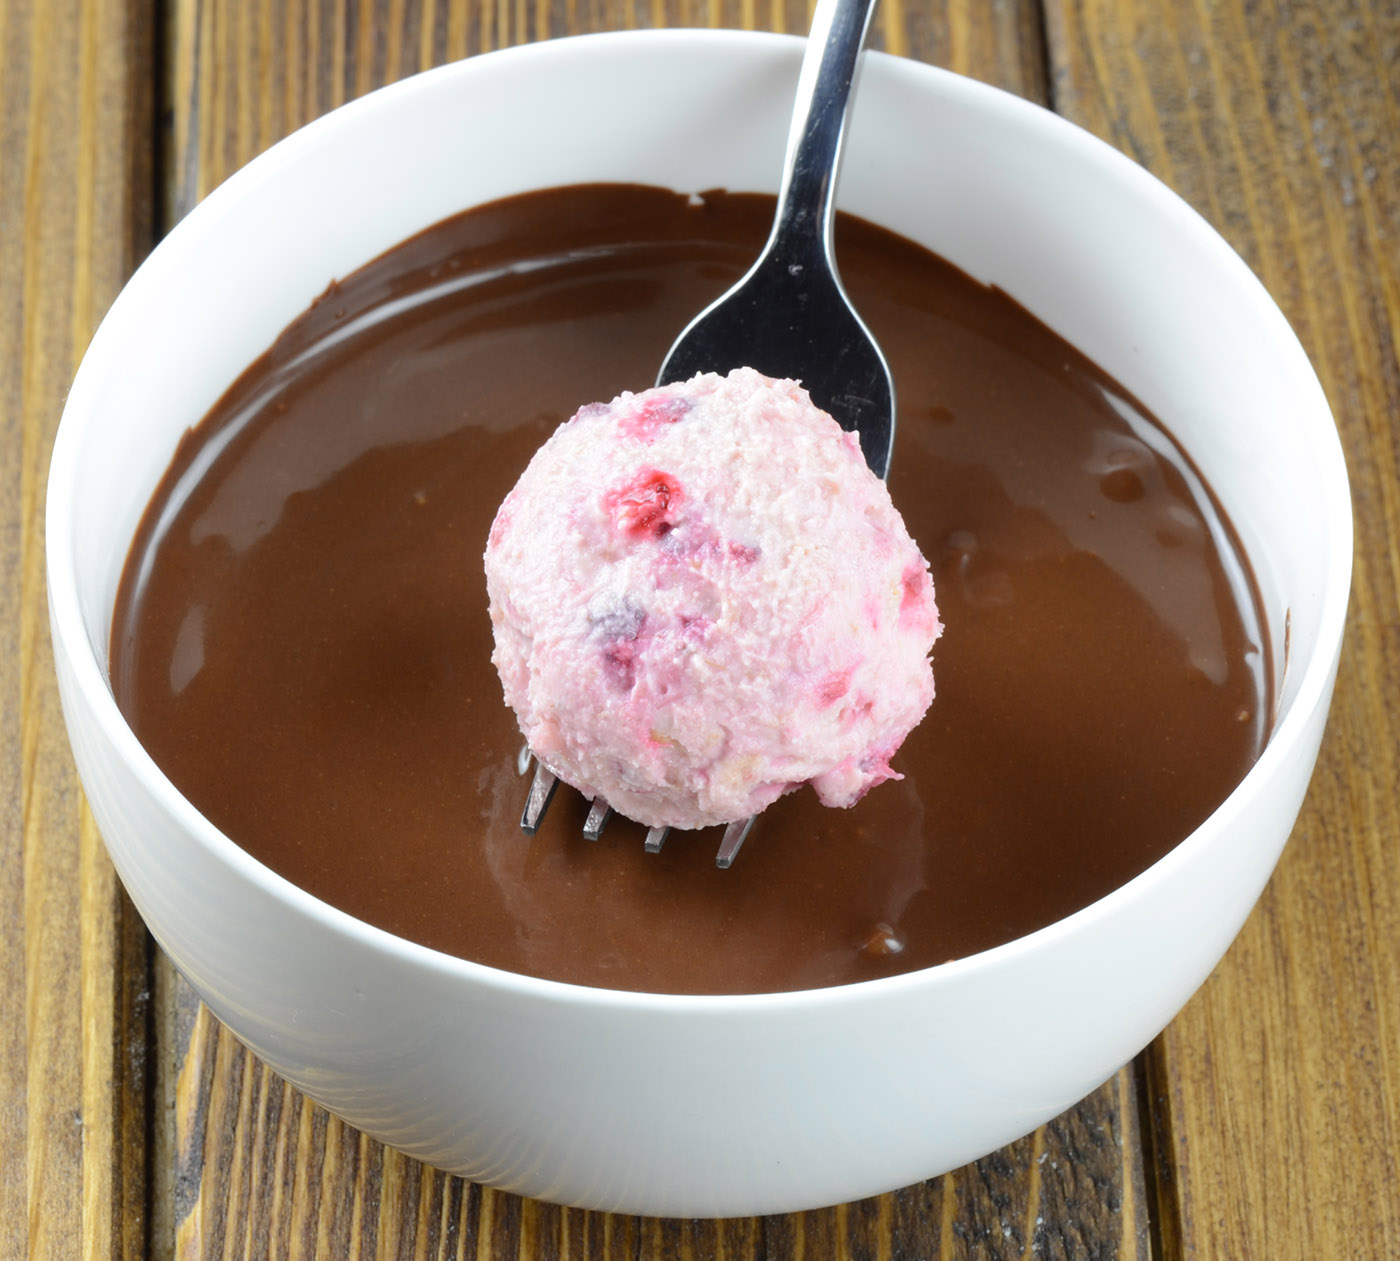 A raspberry truffle ball  dipped into a bowl of smooth melted chocolate, held by a fork, ready for coating.